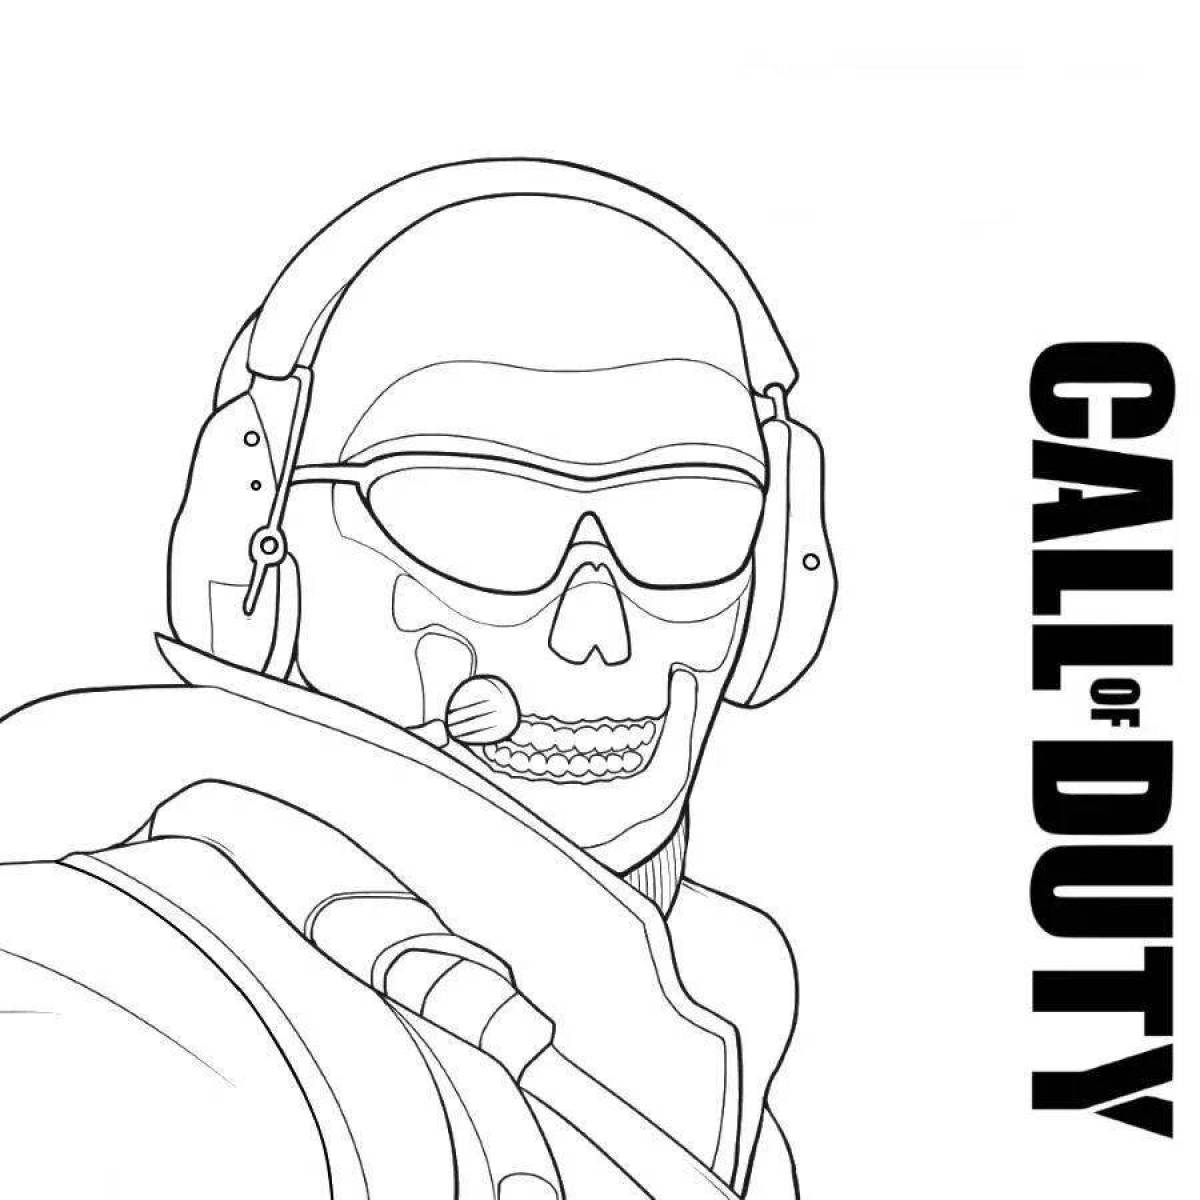 Spooky ghost squad coloring book